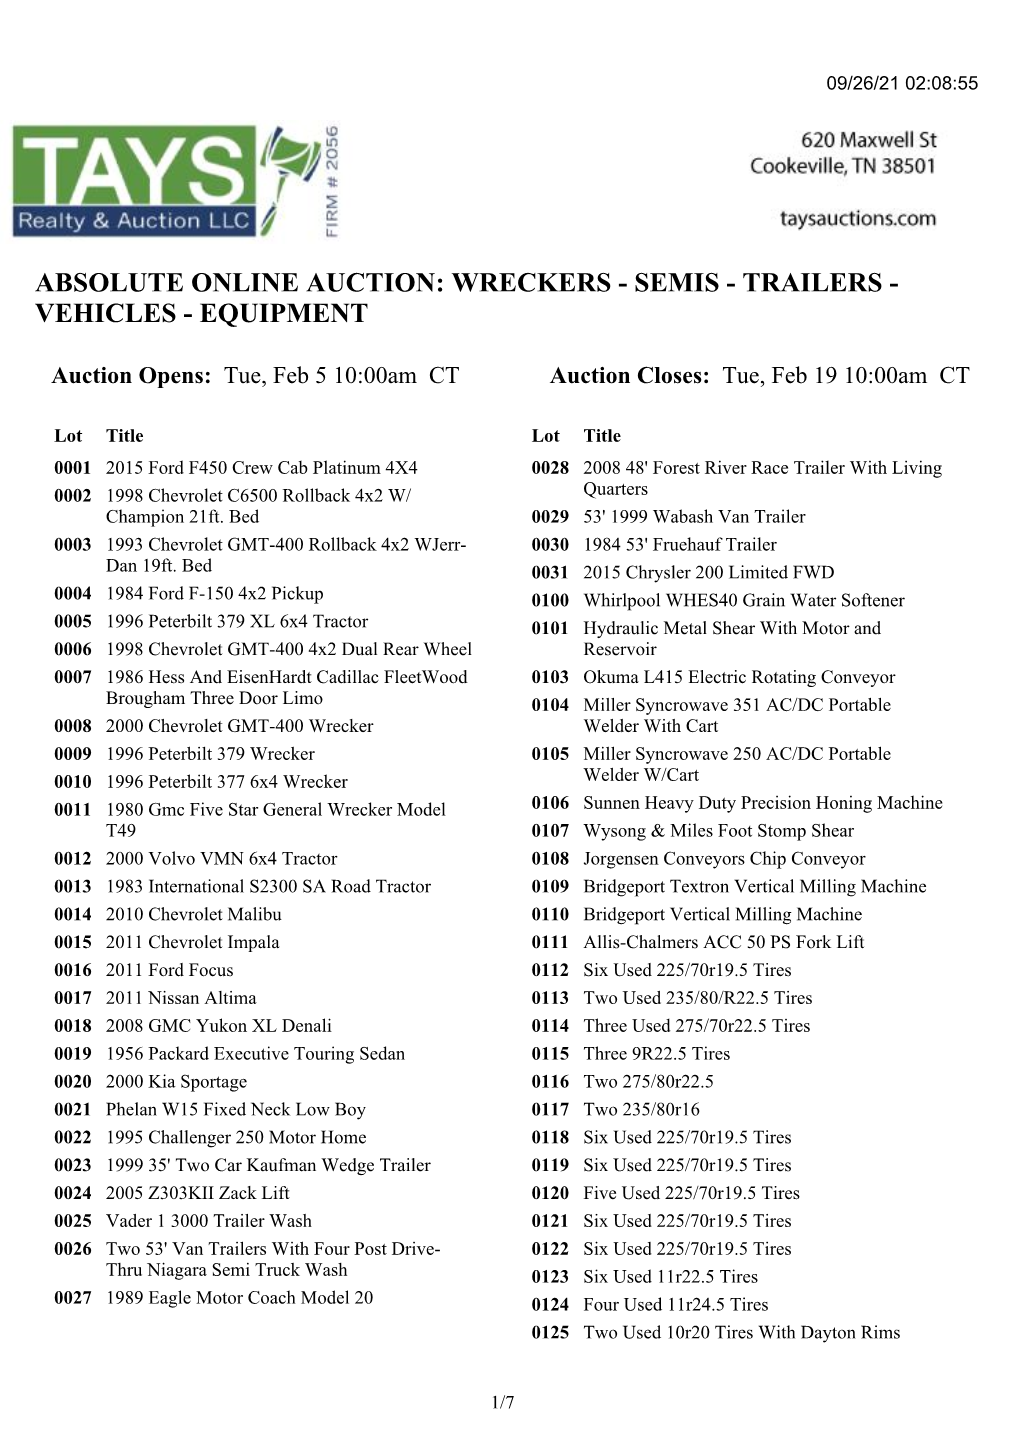 Absolute Online Auction: Wreckers - Semis - Trailers - Vehicles - Equipment